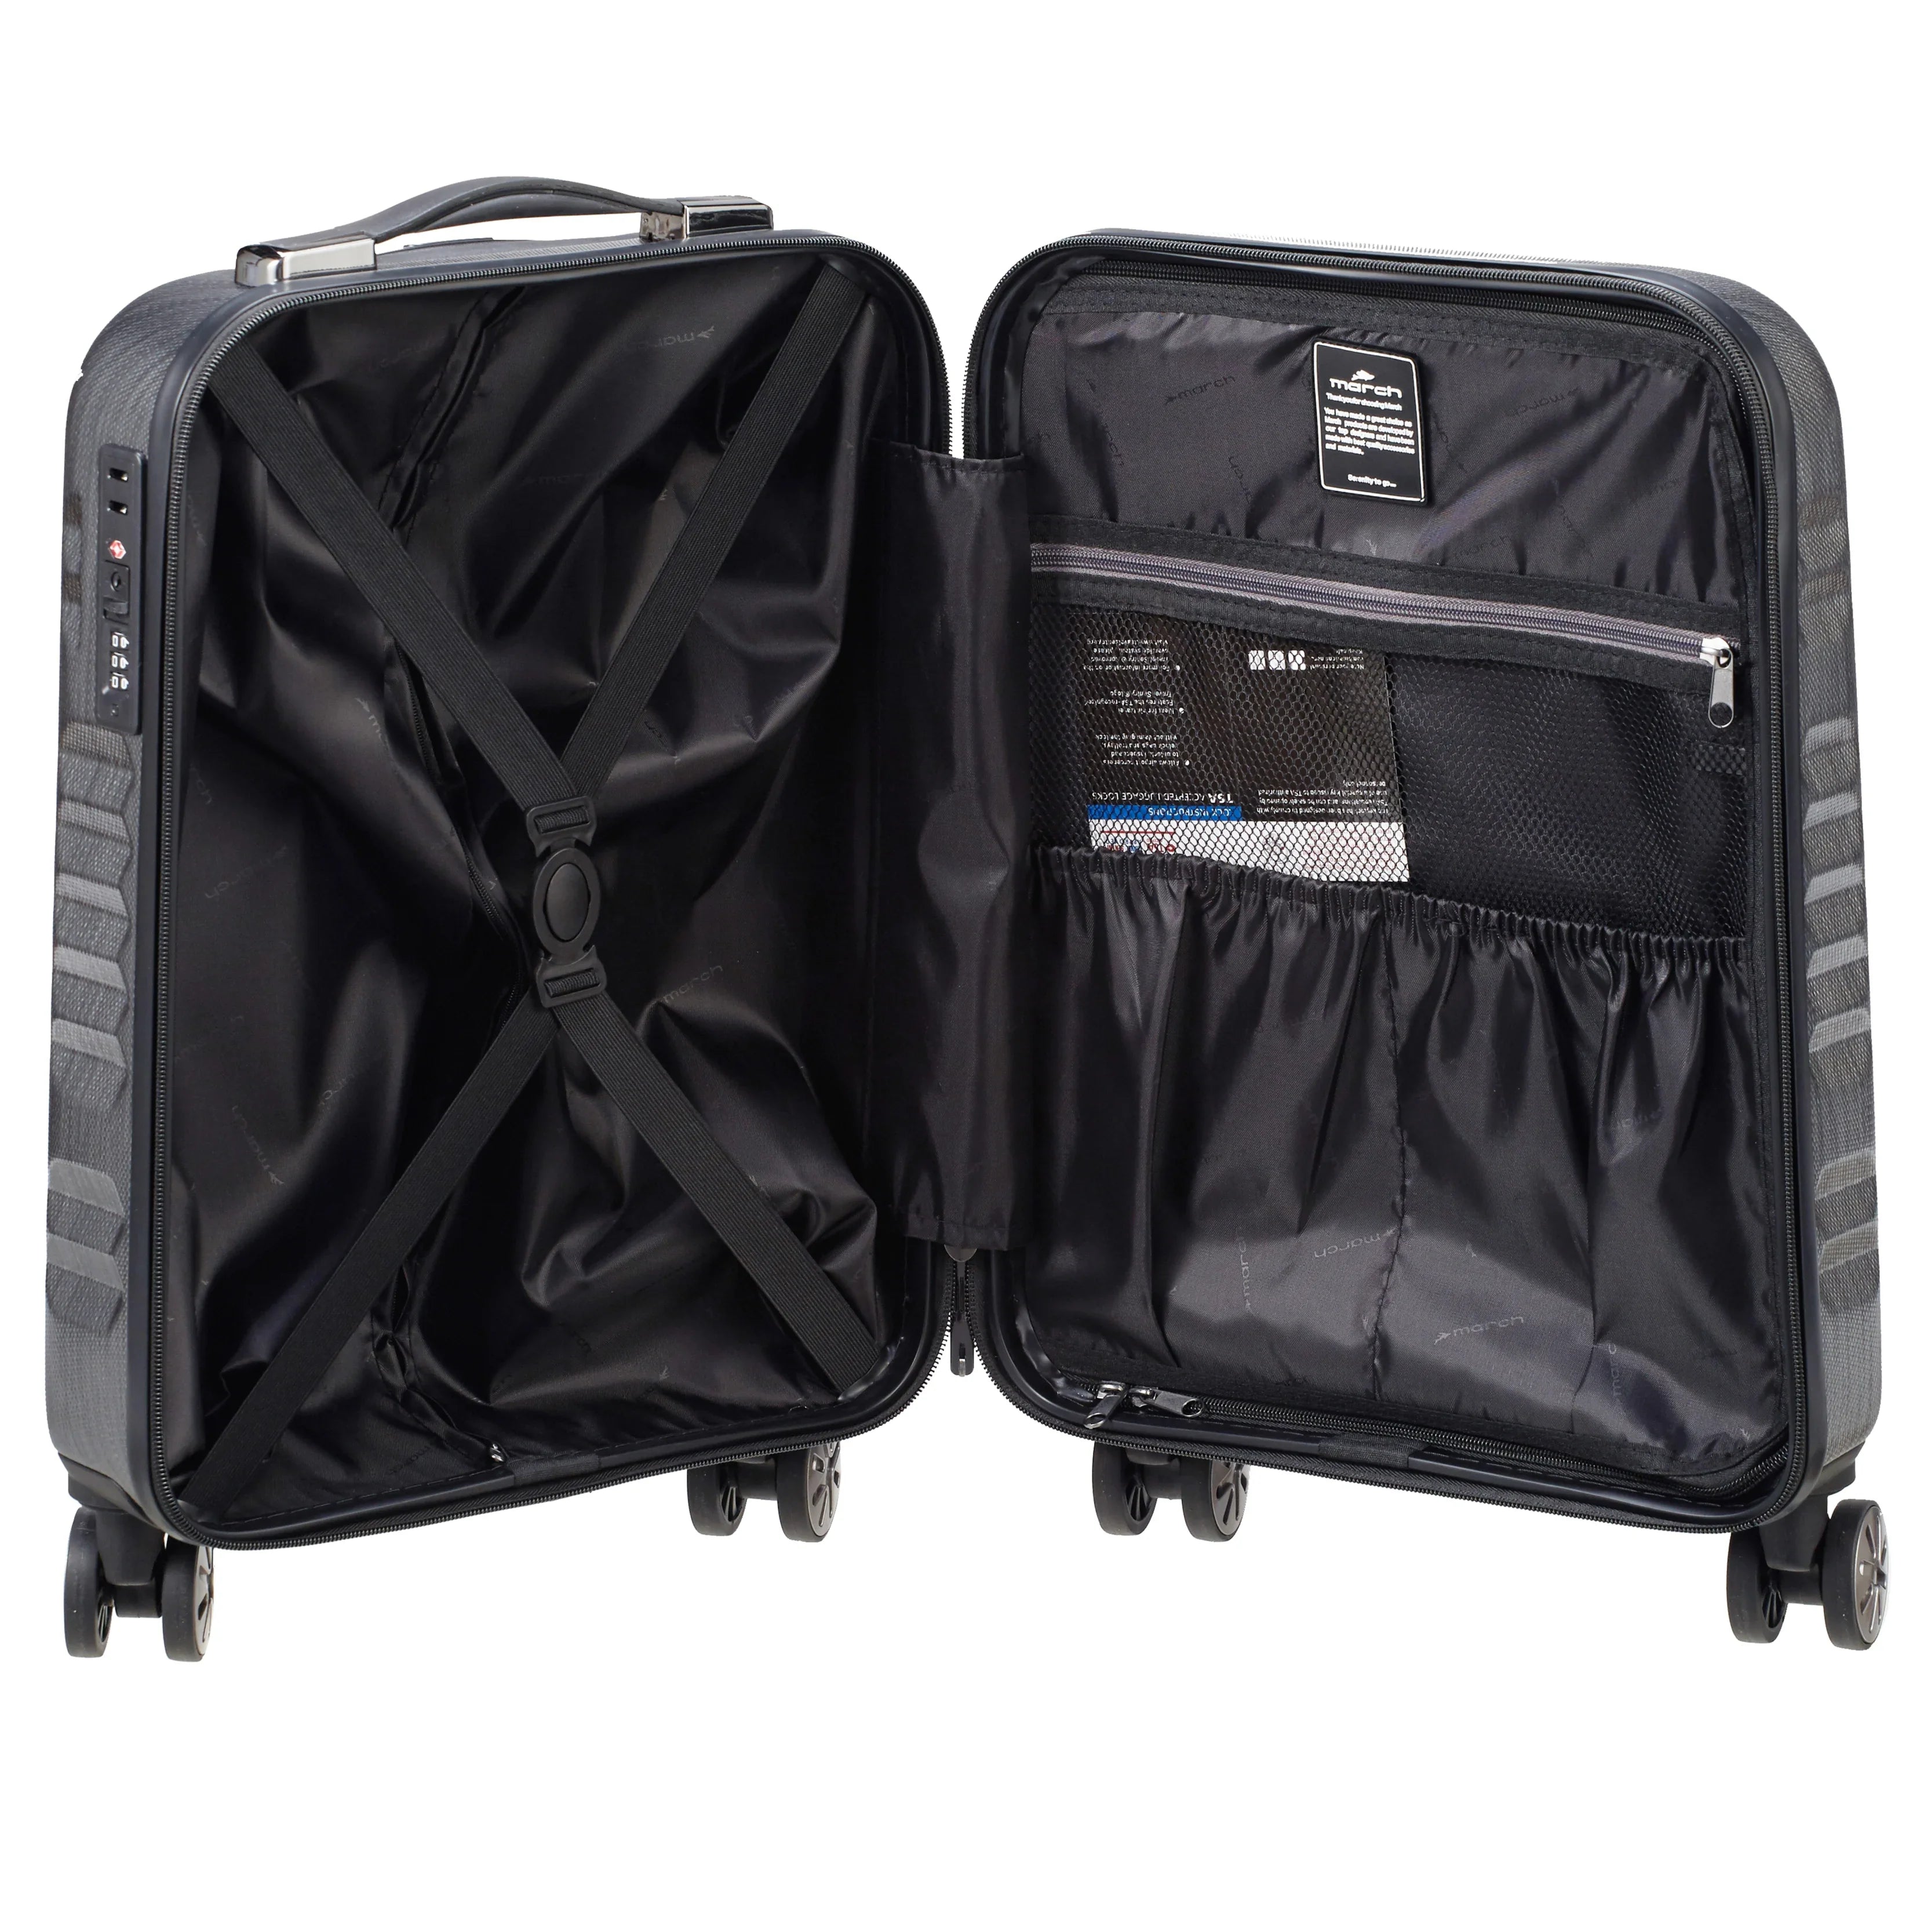 March 15 Trading Fly 4-Rollen Trolley 55 cm - black brushed